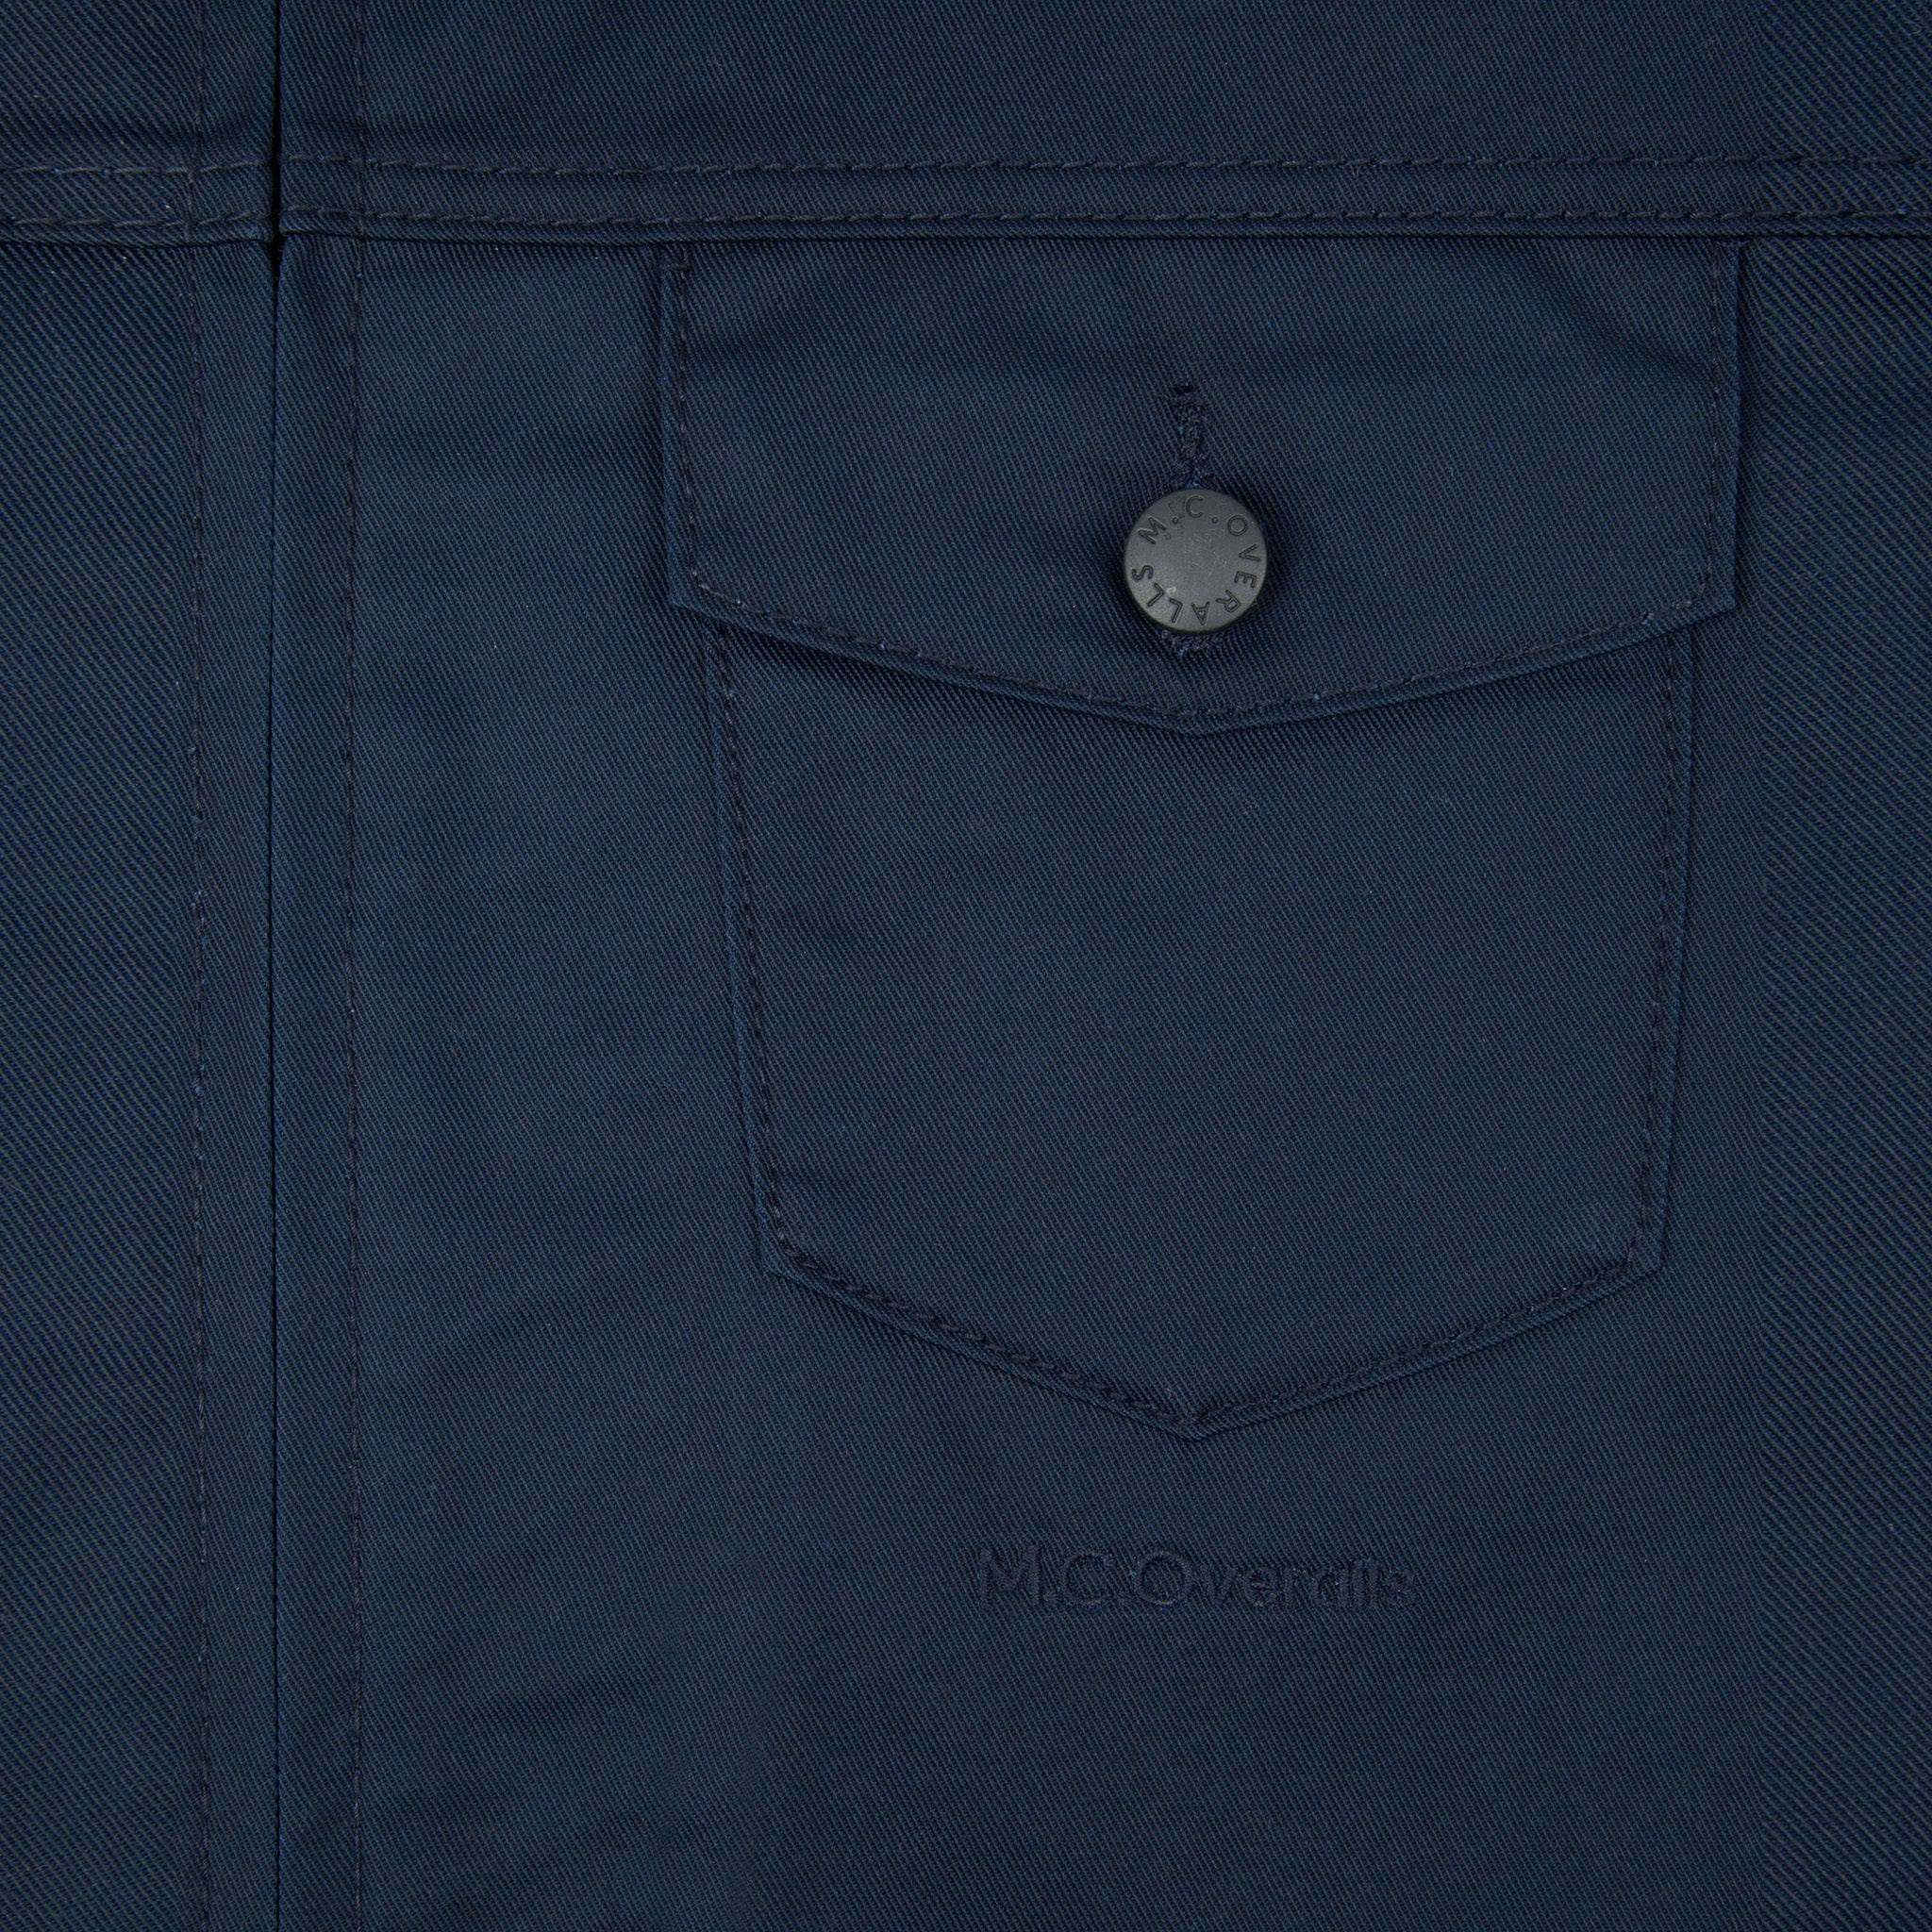 M.C.O&#39;s Logo Under the Pocket of Navy Work Overalls.